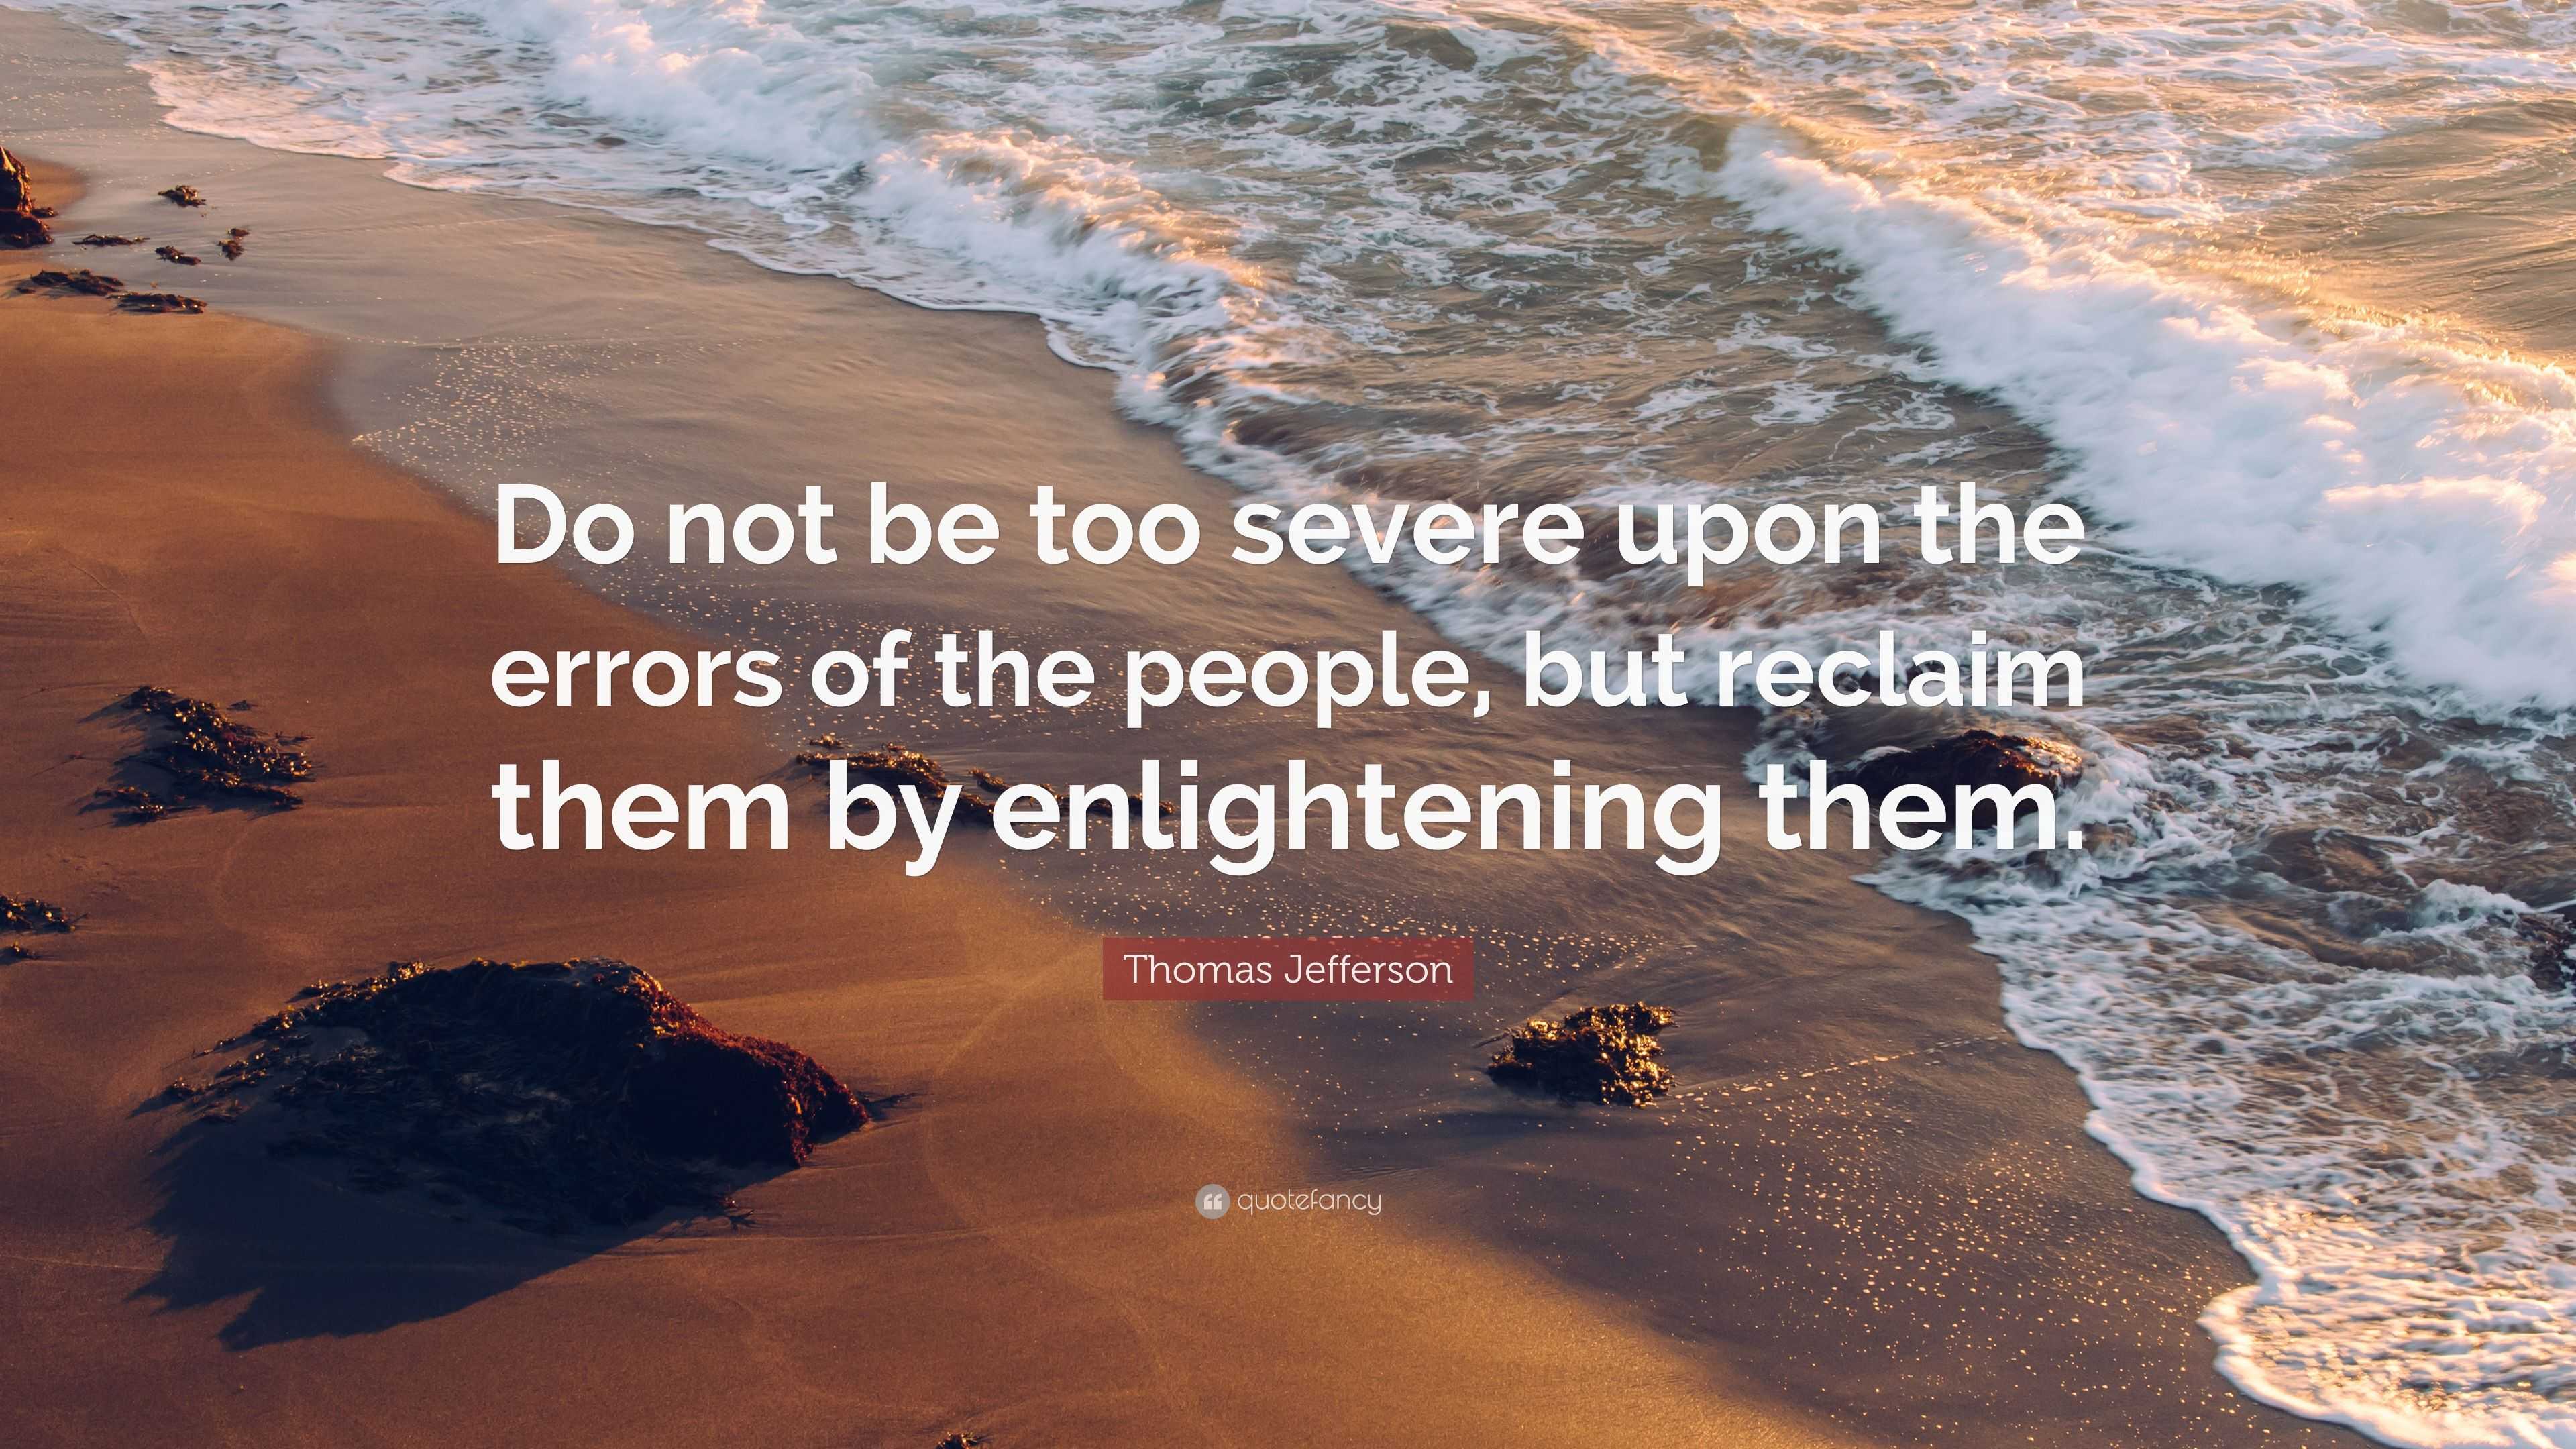 Thomas Jefferson Quote: “Do not be too severe upon the errors of the ...